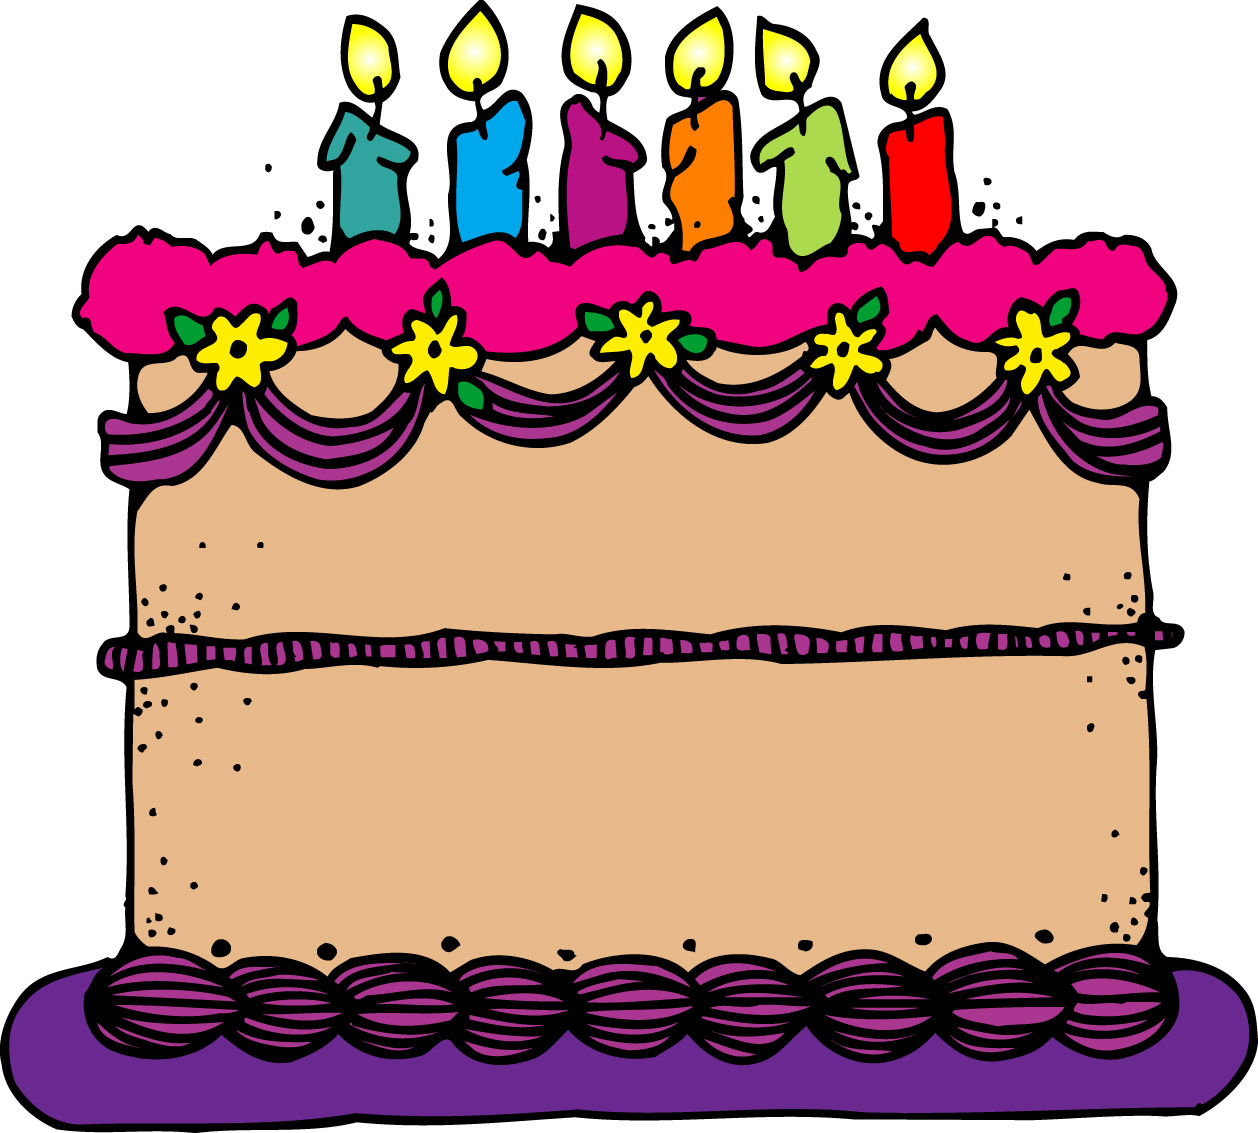 Birthday Cake Clip Art Png | Clipart Panda - Free Clipart Images